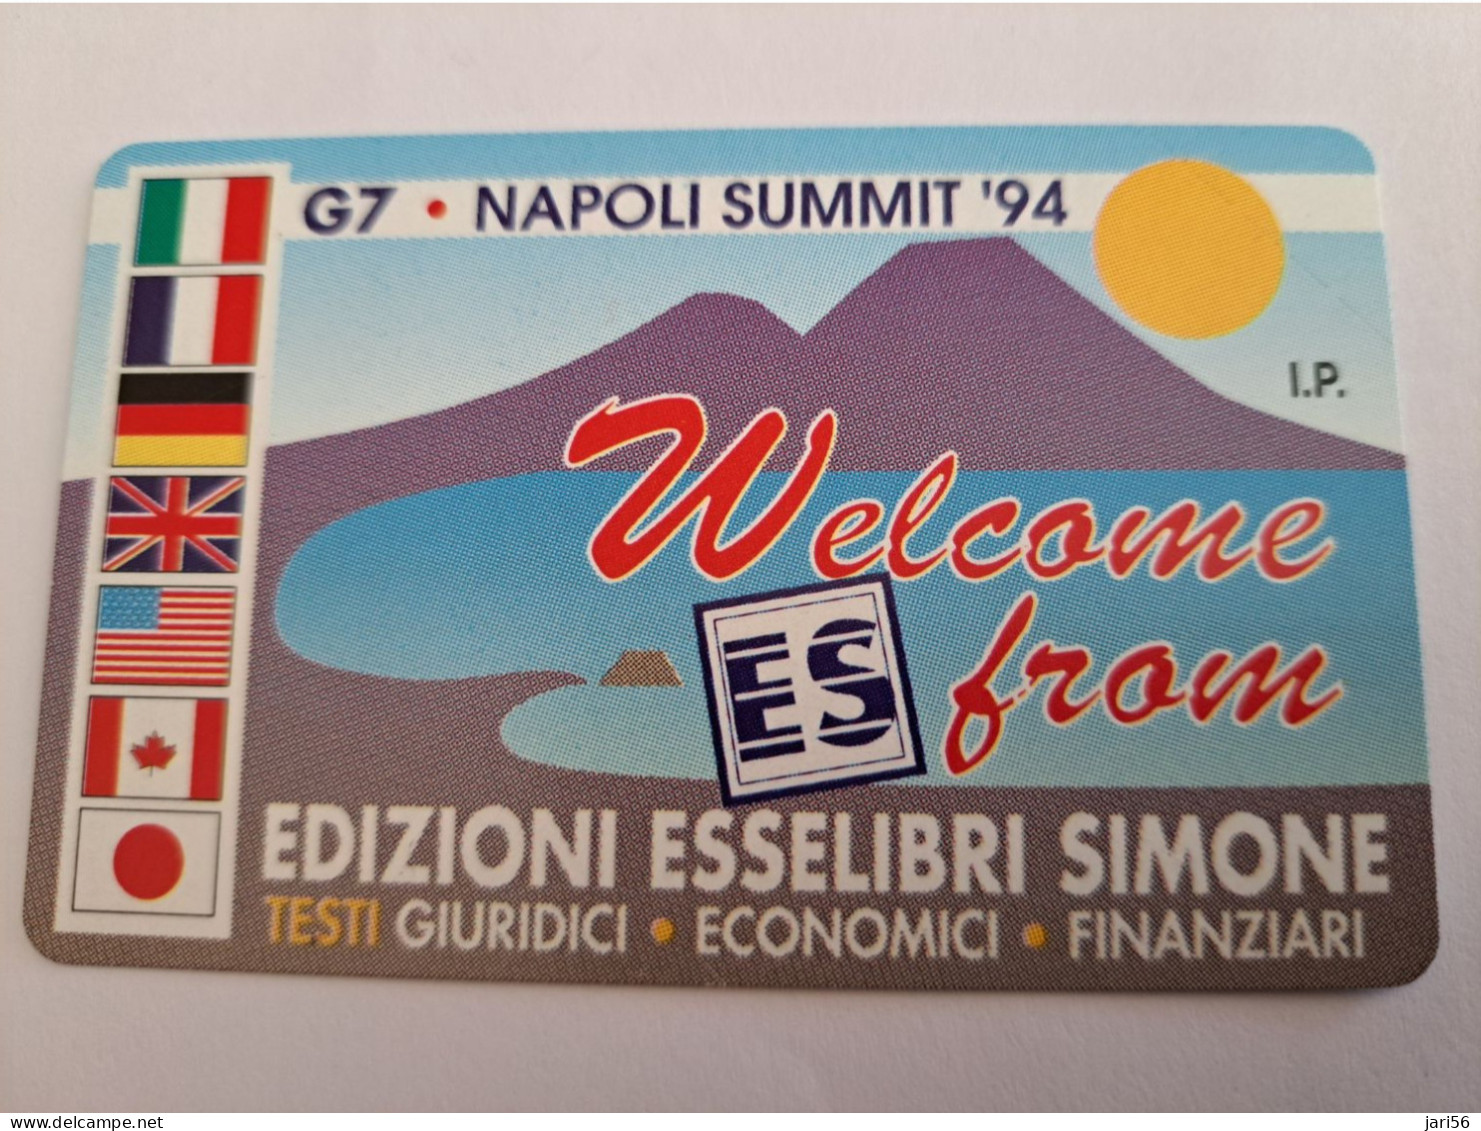 ITALIA LIRE 2000 /G7 NAPOLI SUMMIT '94 / WELCOME FROM ES/ FLAGS/  CARD / MINT    PREPAID   ** 16653** - Publiques Ordinaires